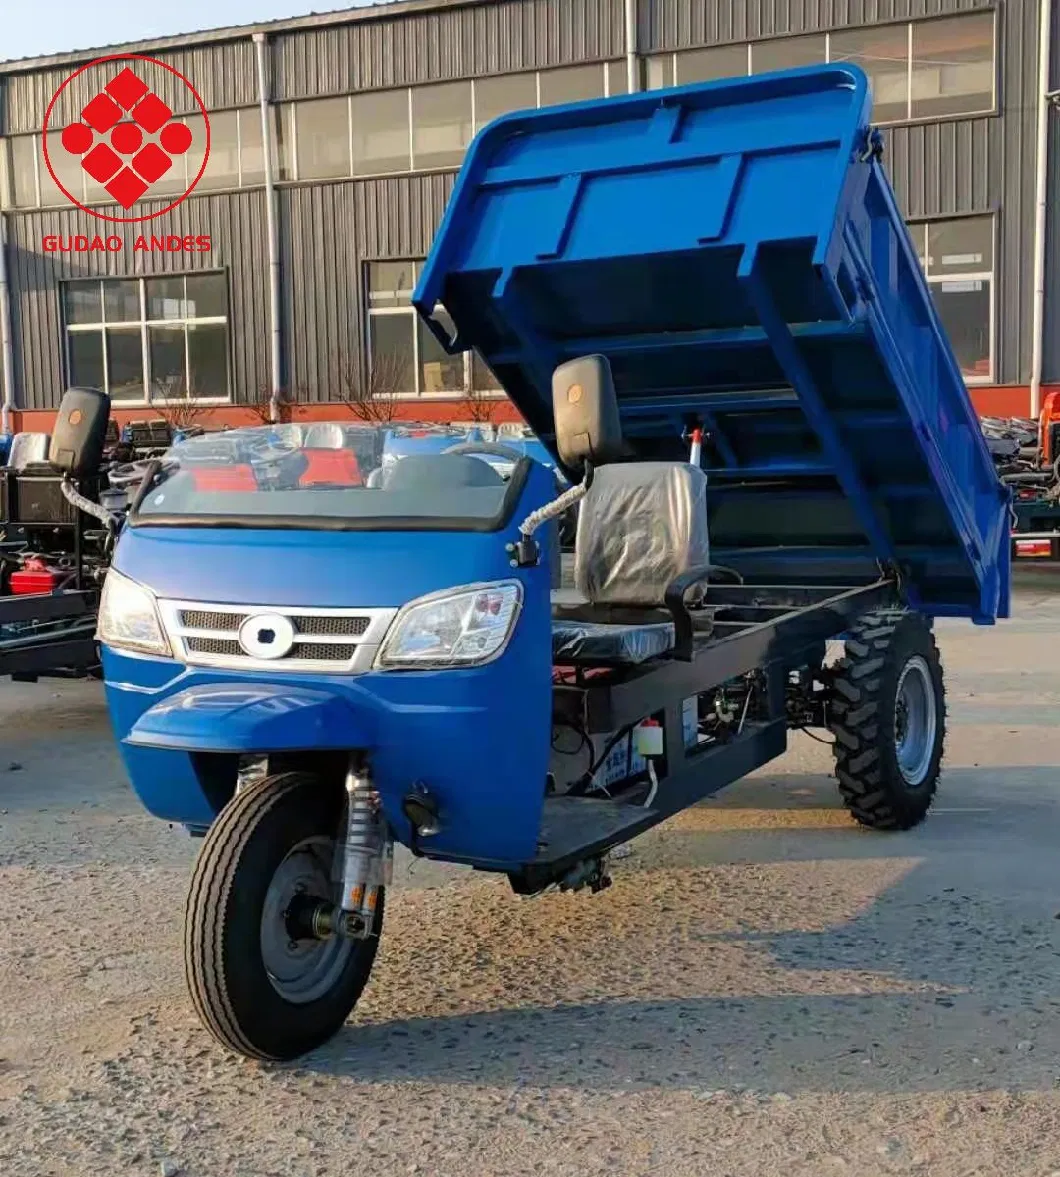 Factory Tricycle 200cc Three Wheel Tricycle Gasoline Tricycle Motorcycle Cargo Loader 3 Wheel Truck Air Coold Tricycle Gudao Andes